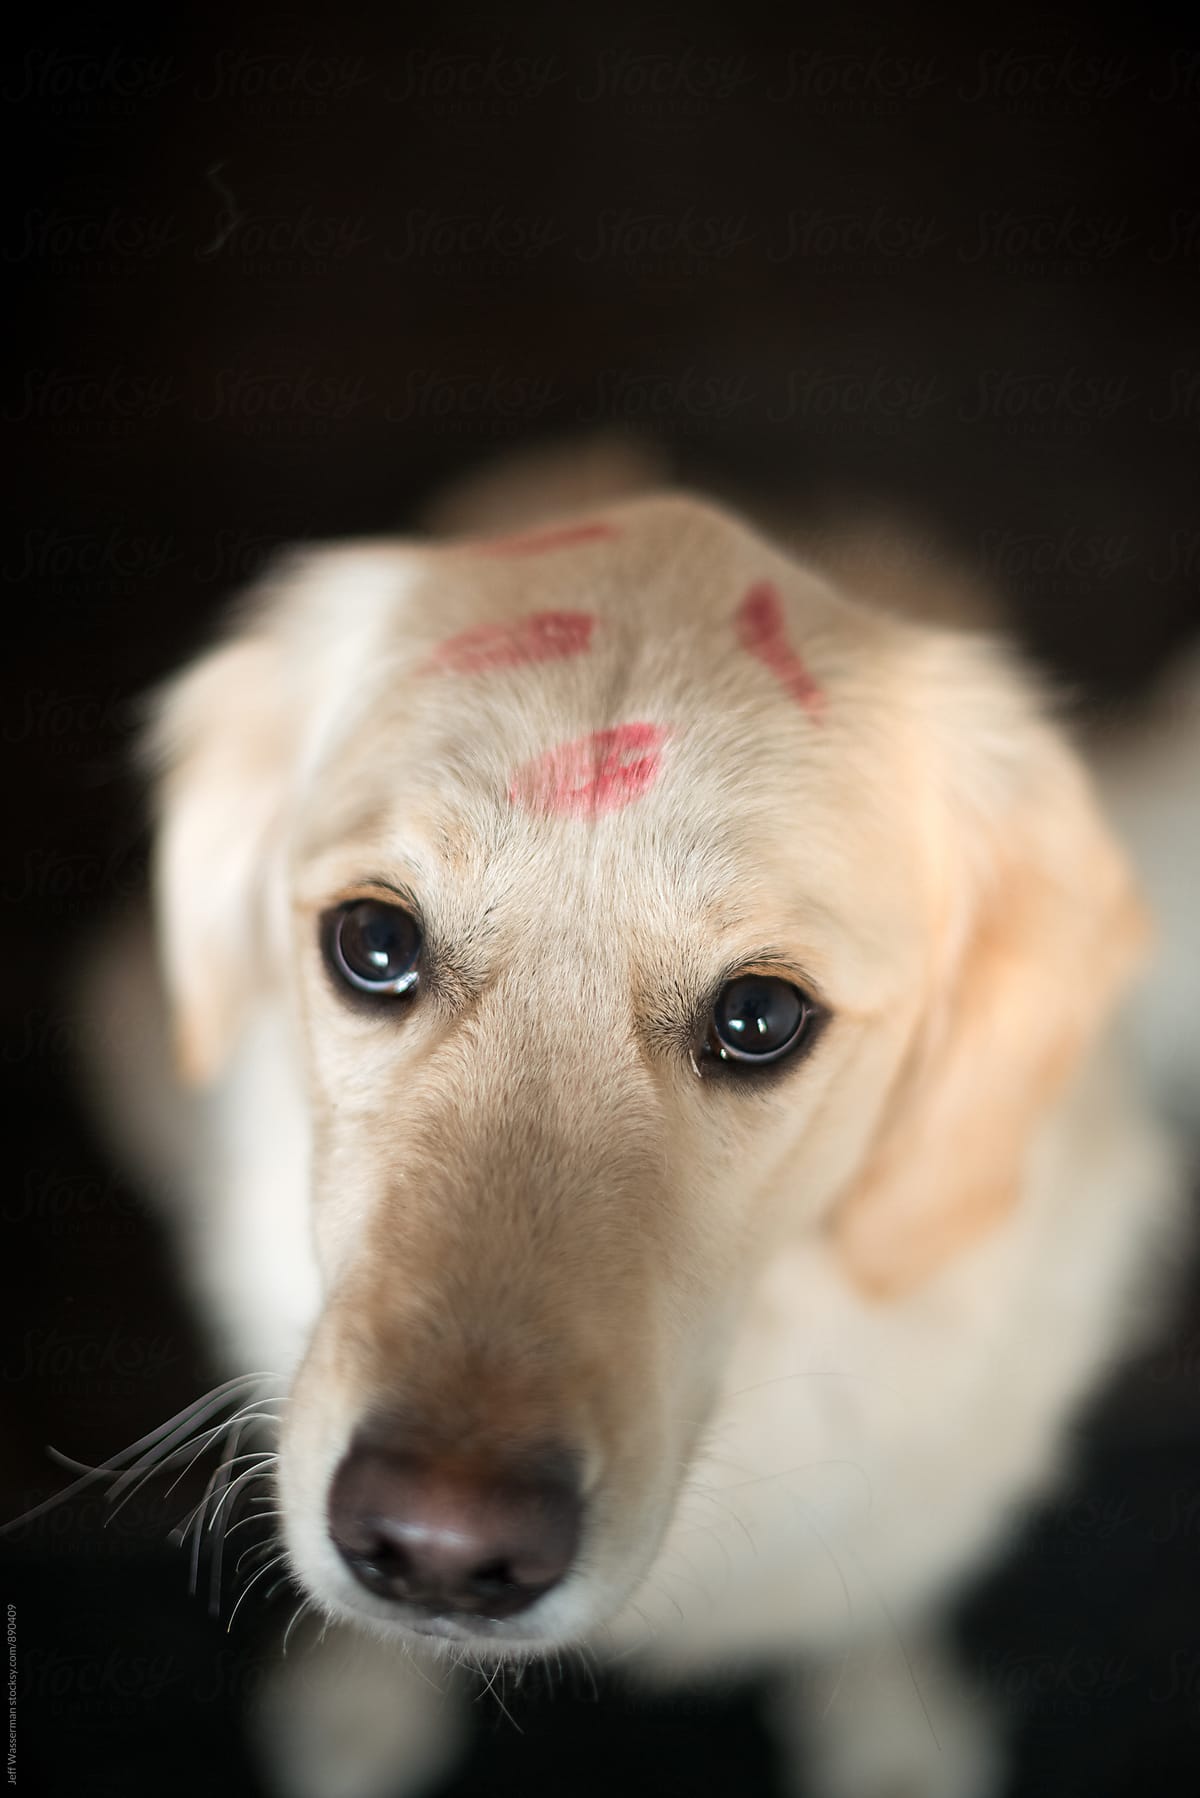 Dog with Lipstick Kisses